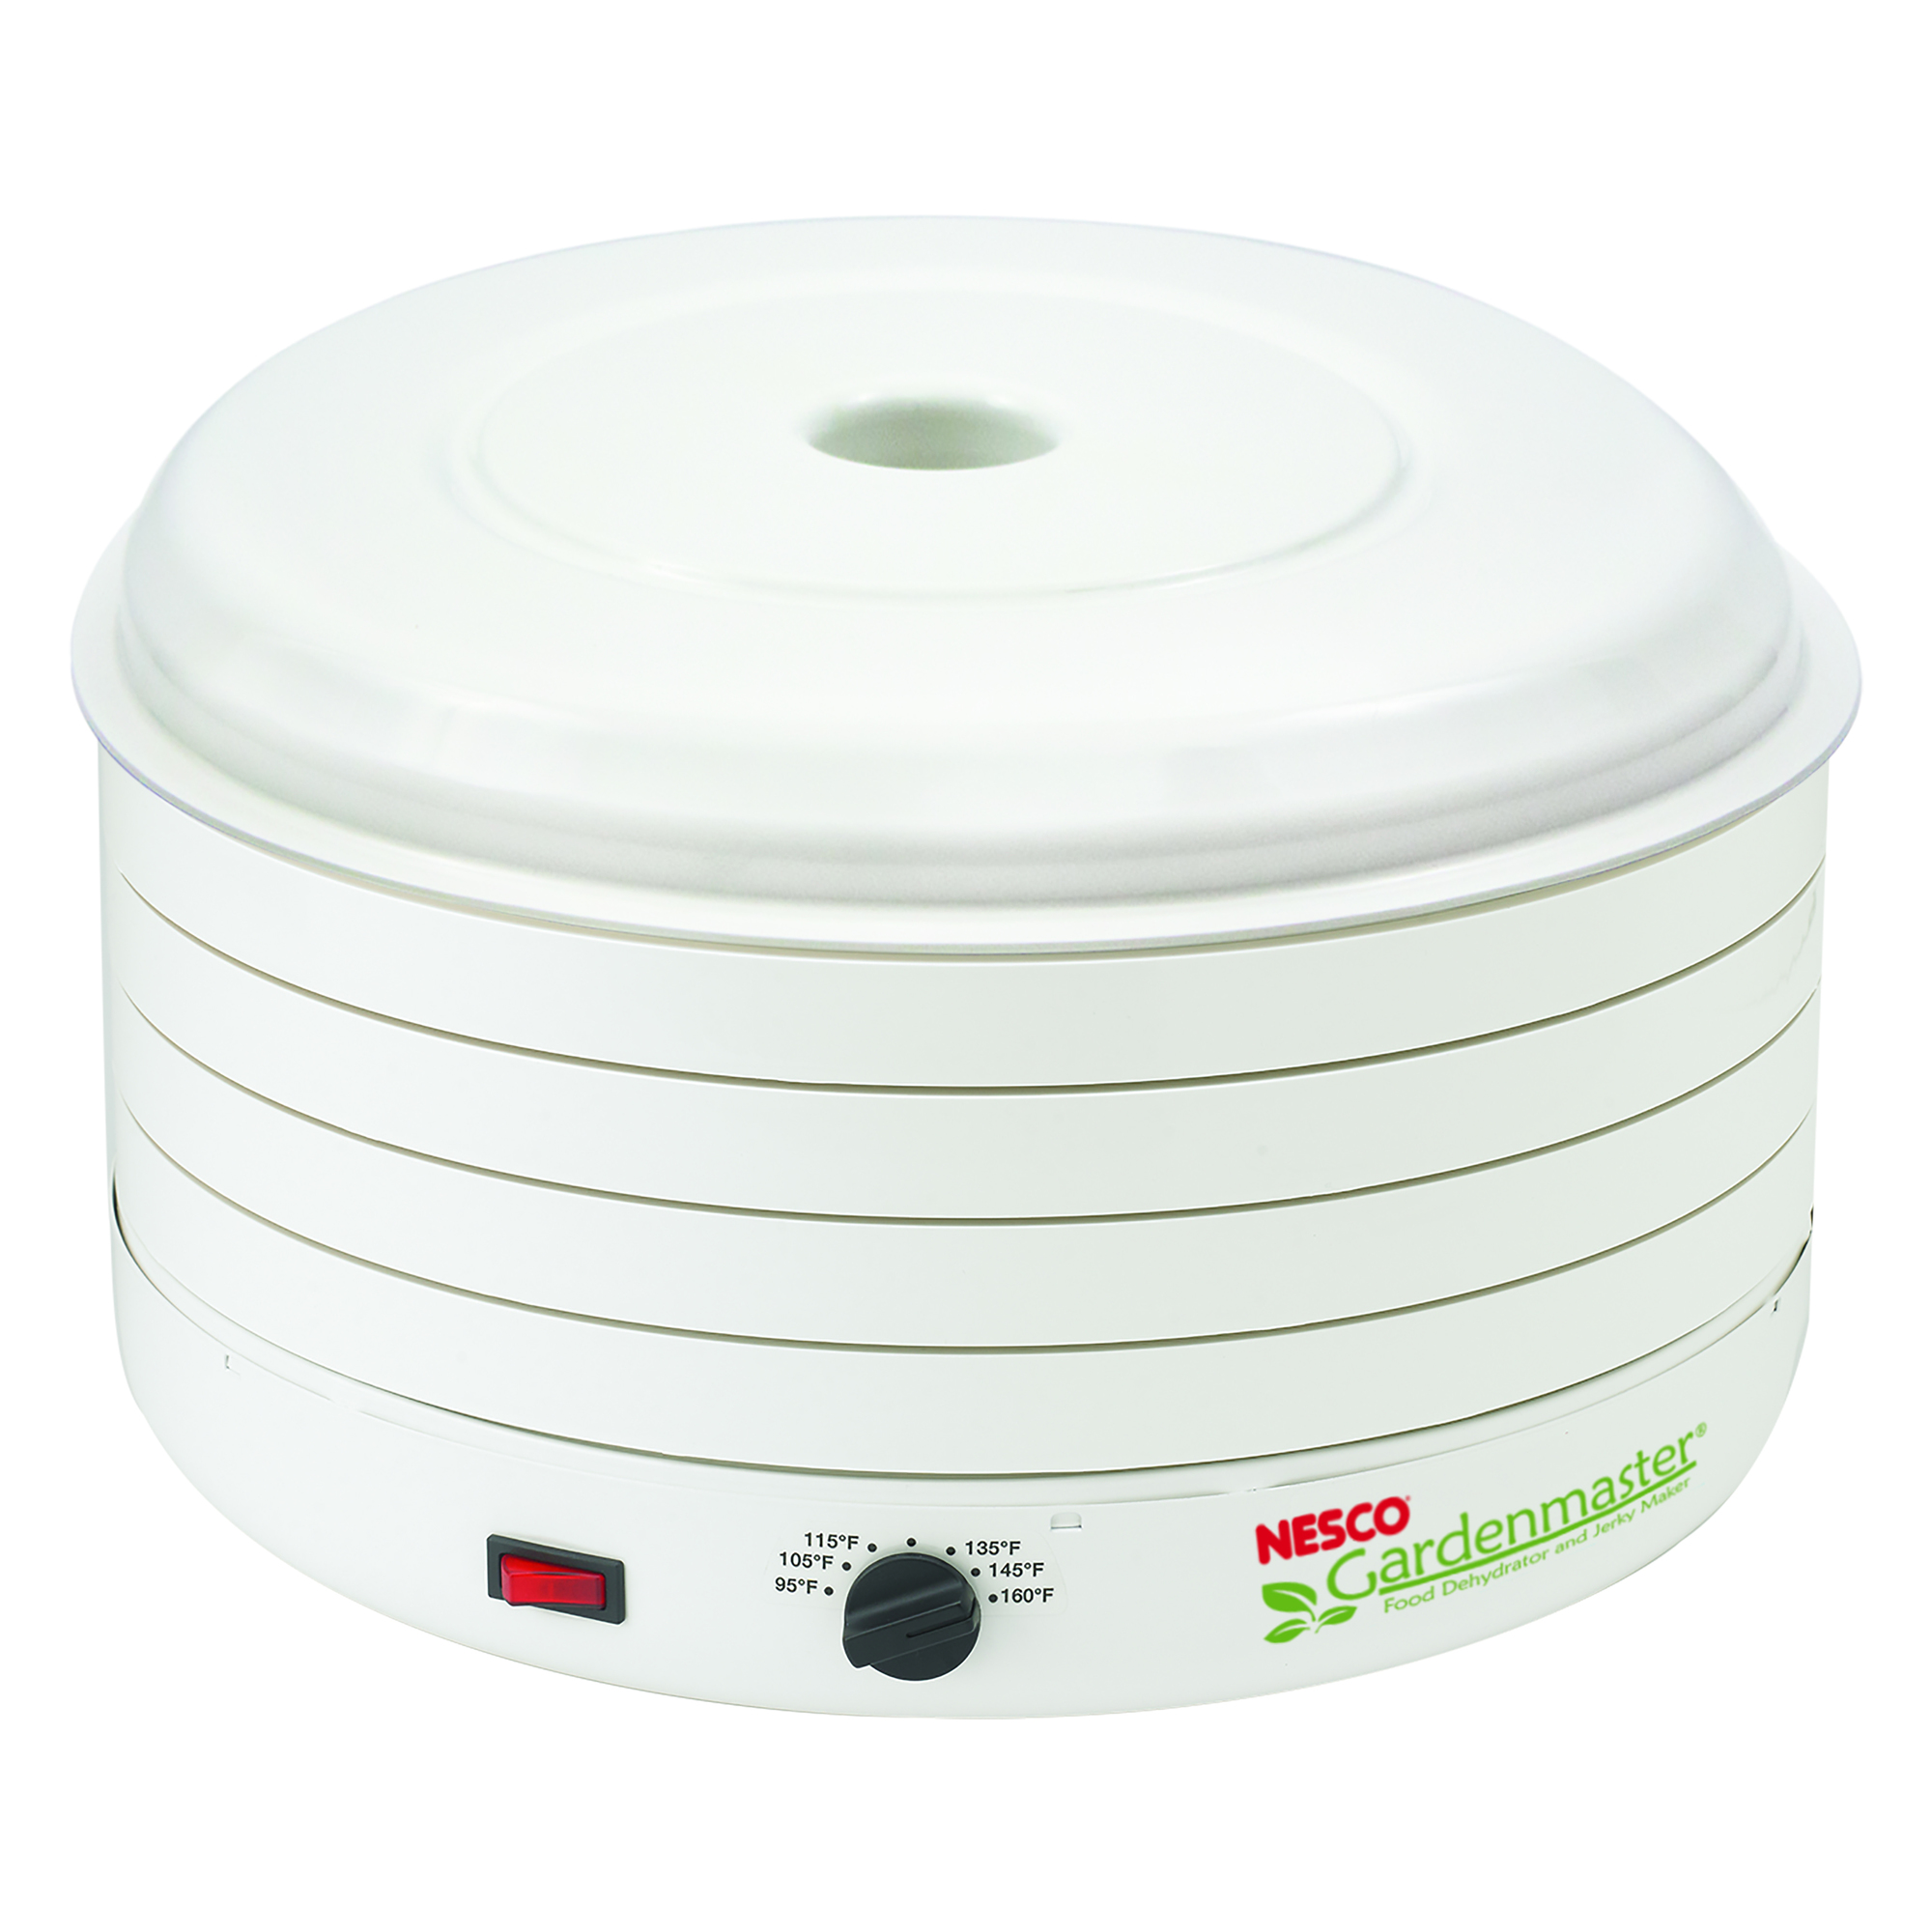 Gardenmaster Pro Food Dehydrator, Trays Included (qty.) 4, Primary Color White, Watts 1000, Model - Nesco FD-1010